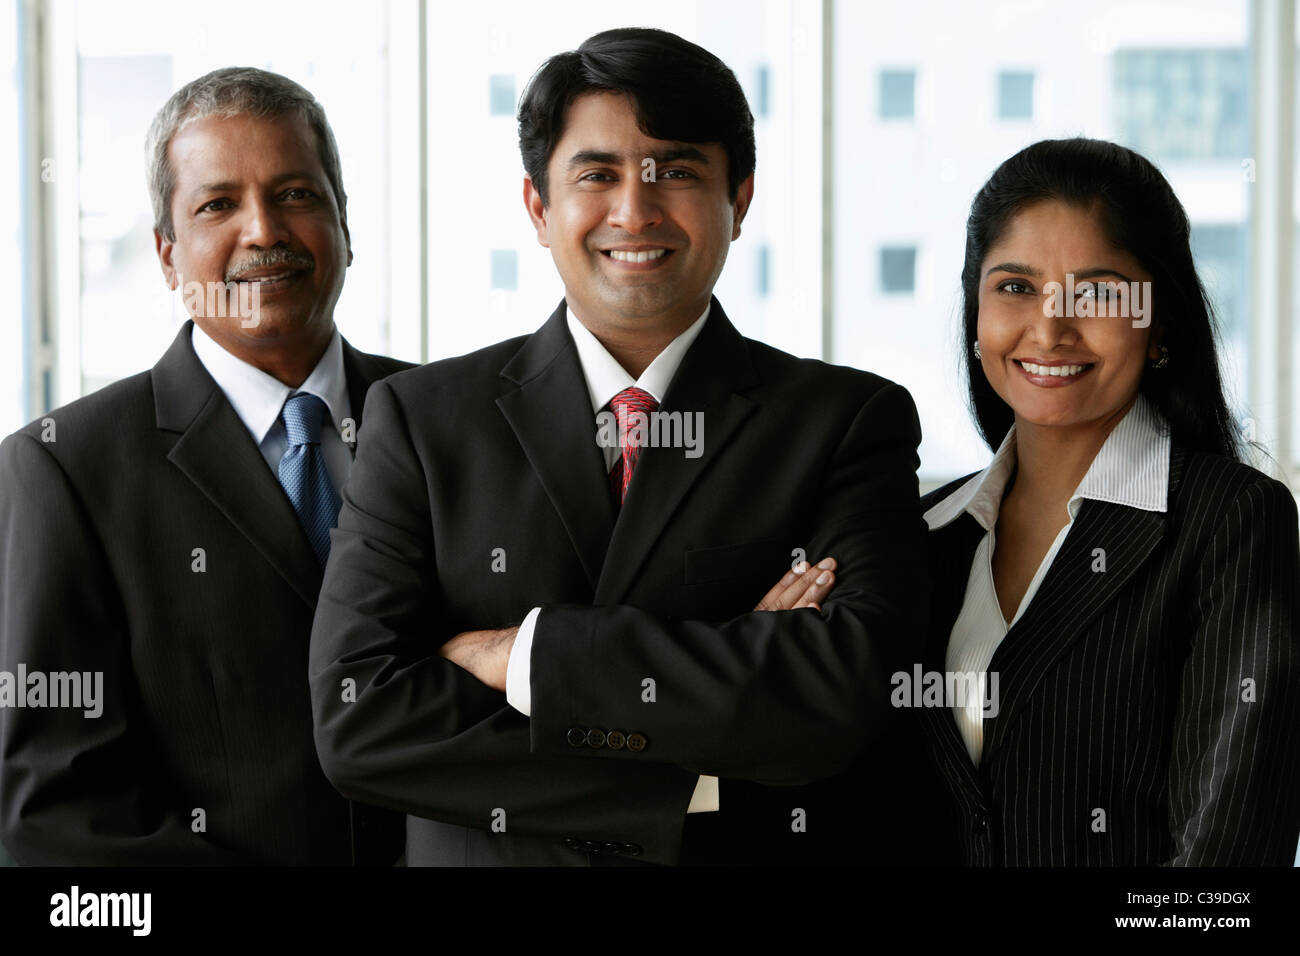 Indian people smiling wearing business attire Stock Photo